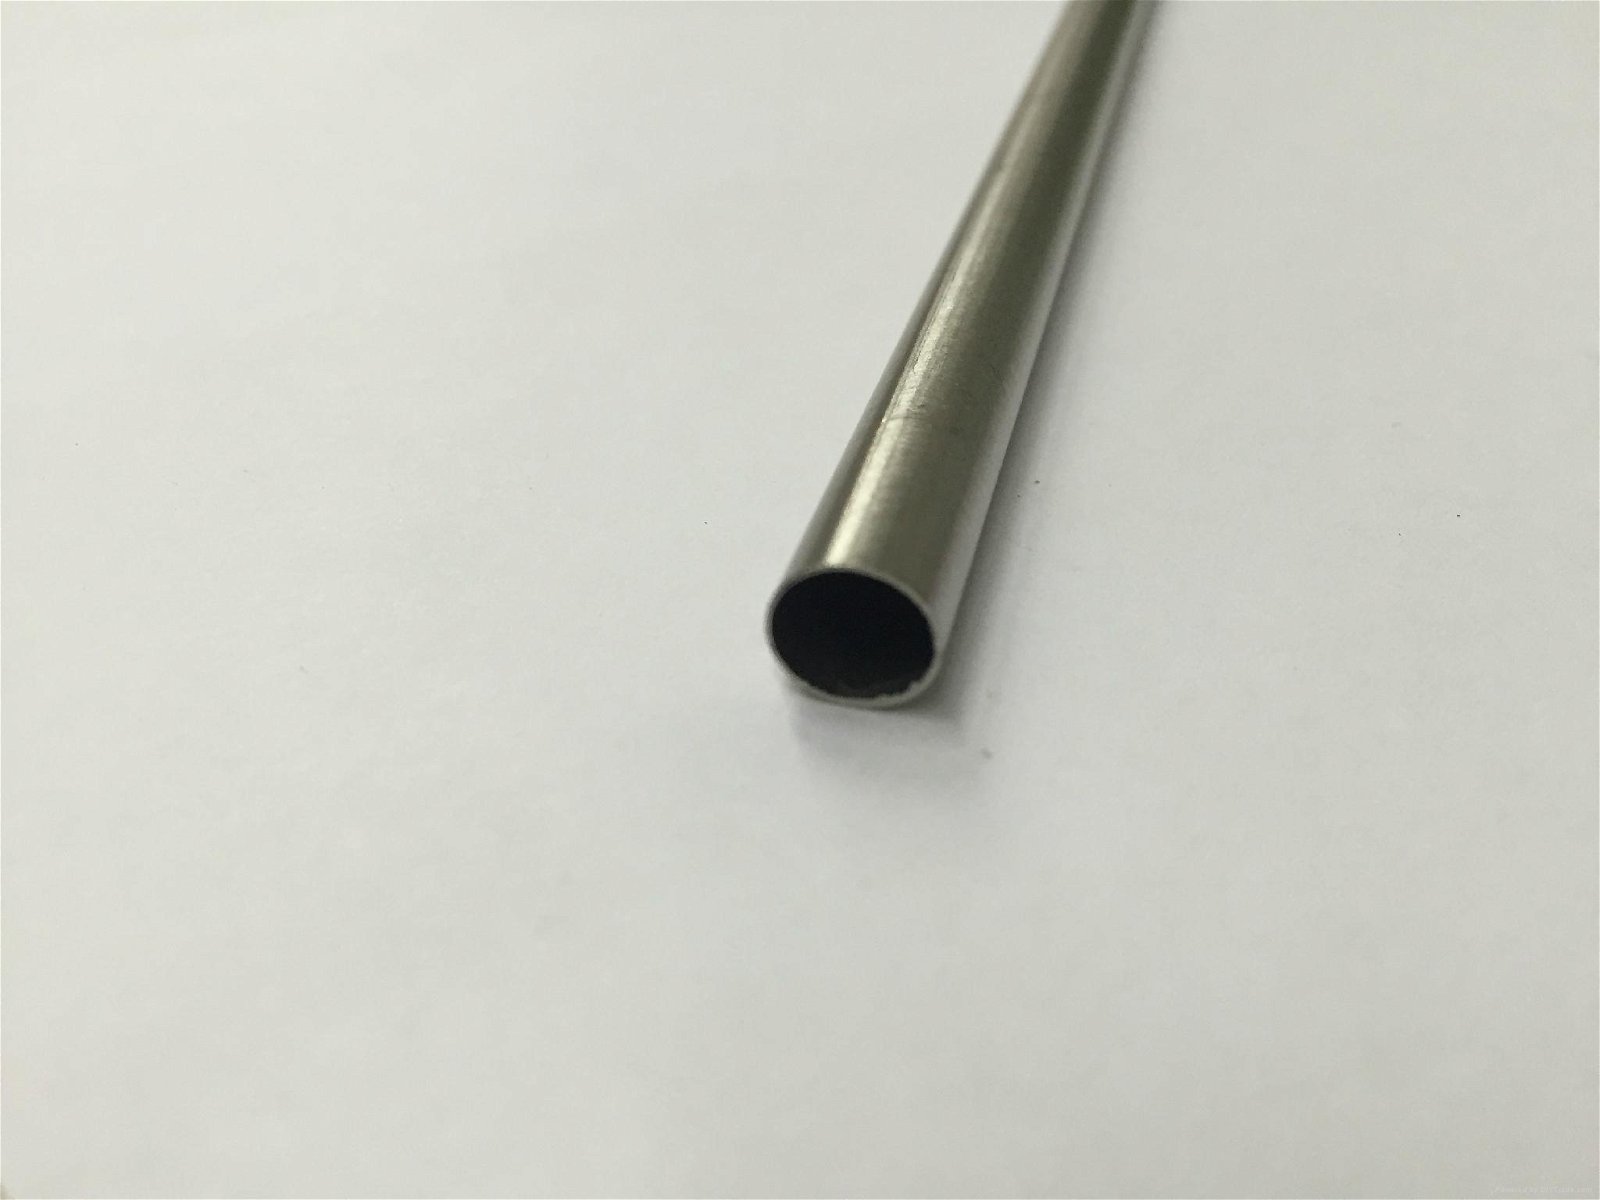 Trustworthy China factory 316L precision pipe for conditioning system 3